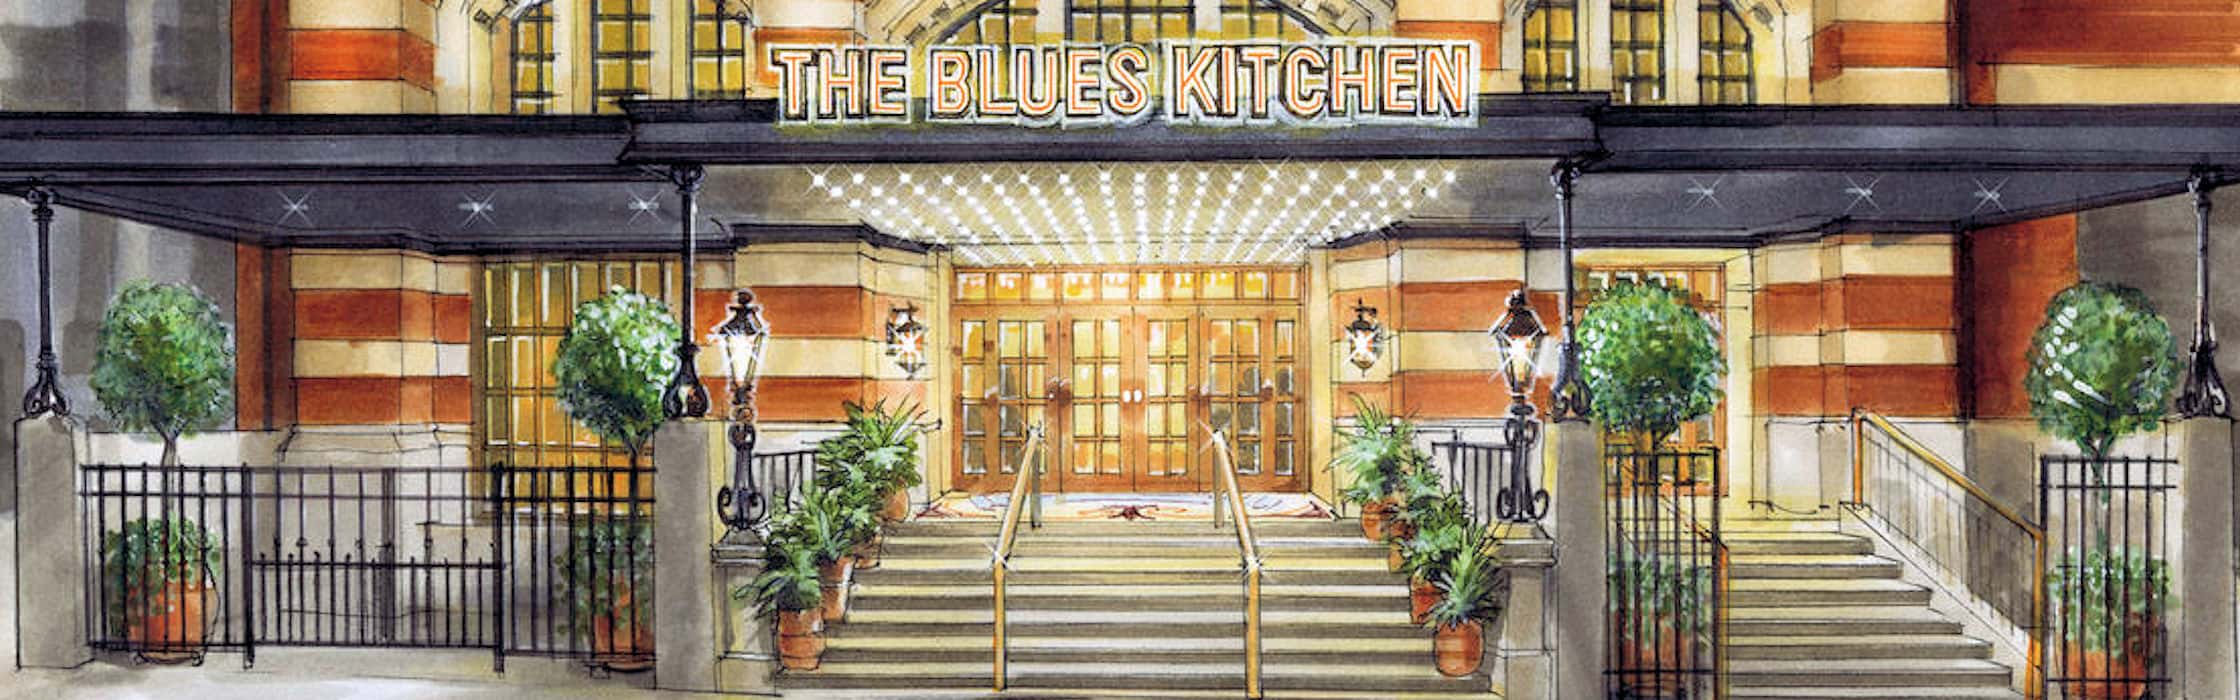 What's On at The Blues Kitchen, Manchester